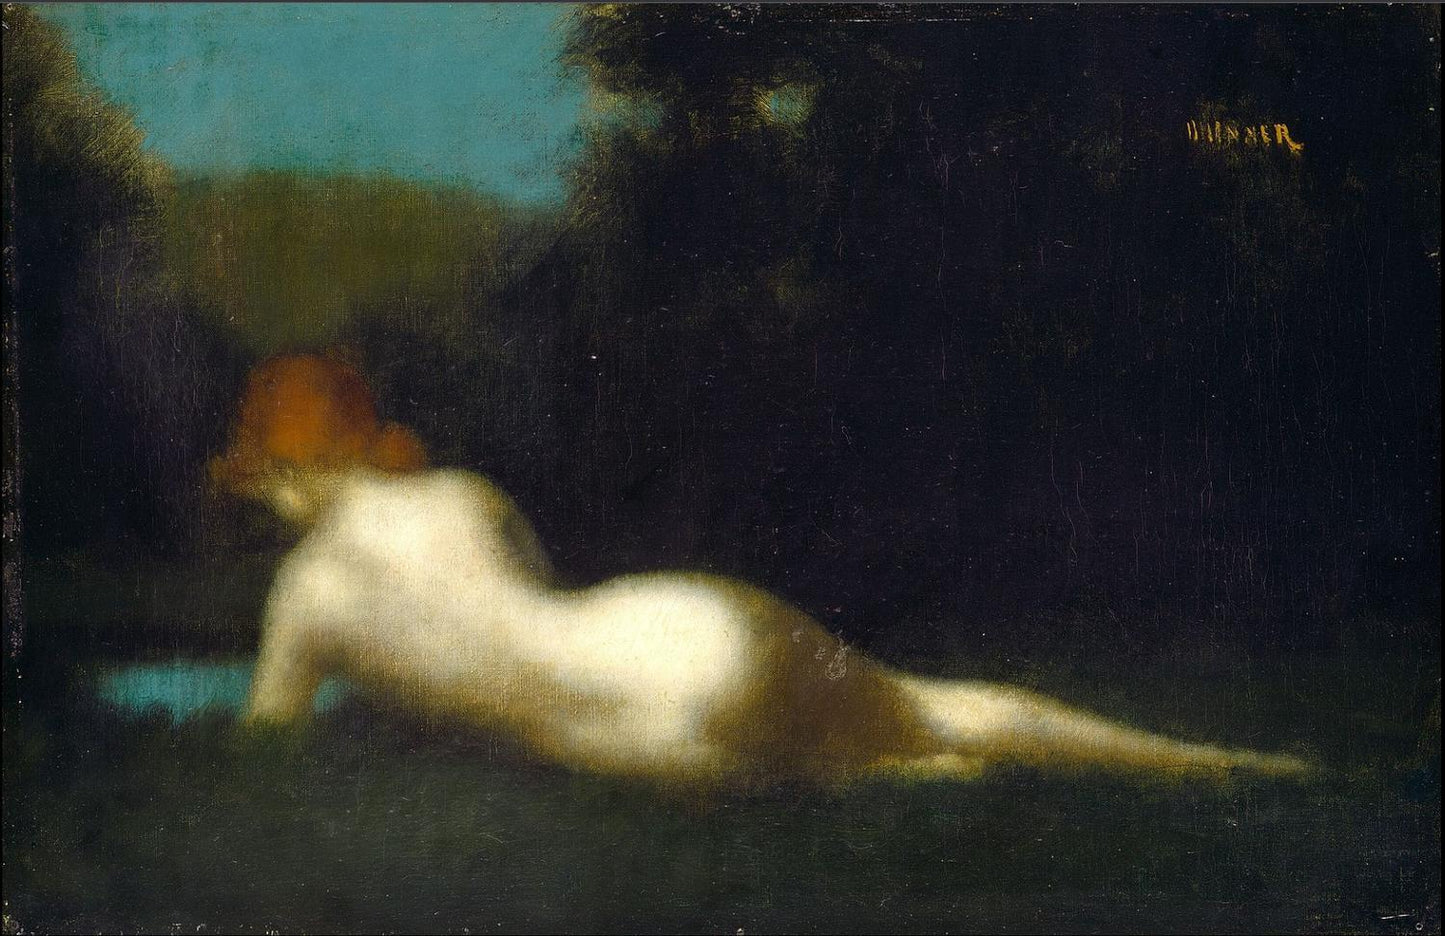 Reclining Nude, Jean-Jacques Henner